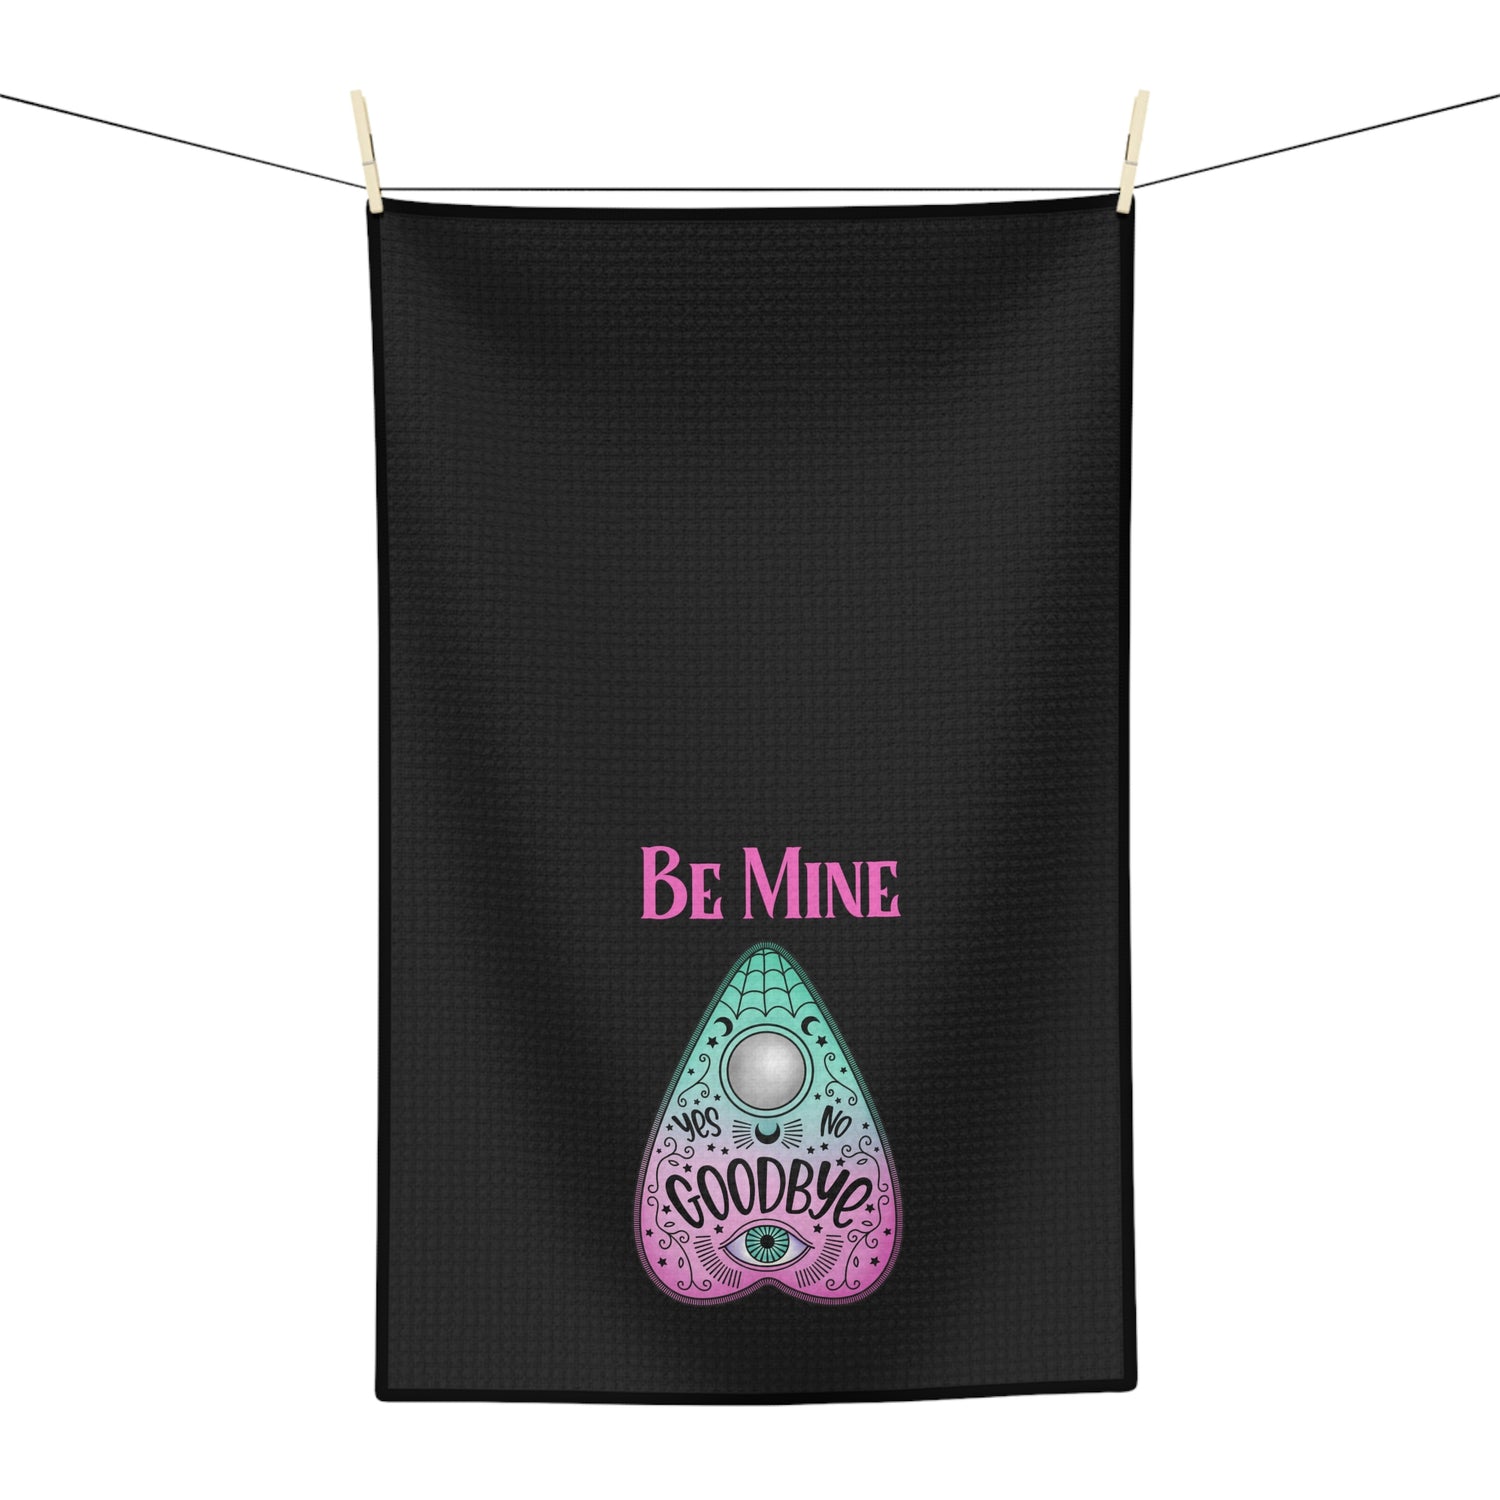 Be Mine Black Tea Towel - Witchy Kitchens